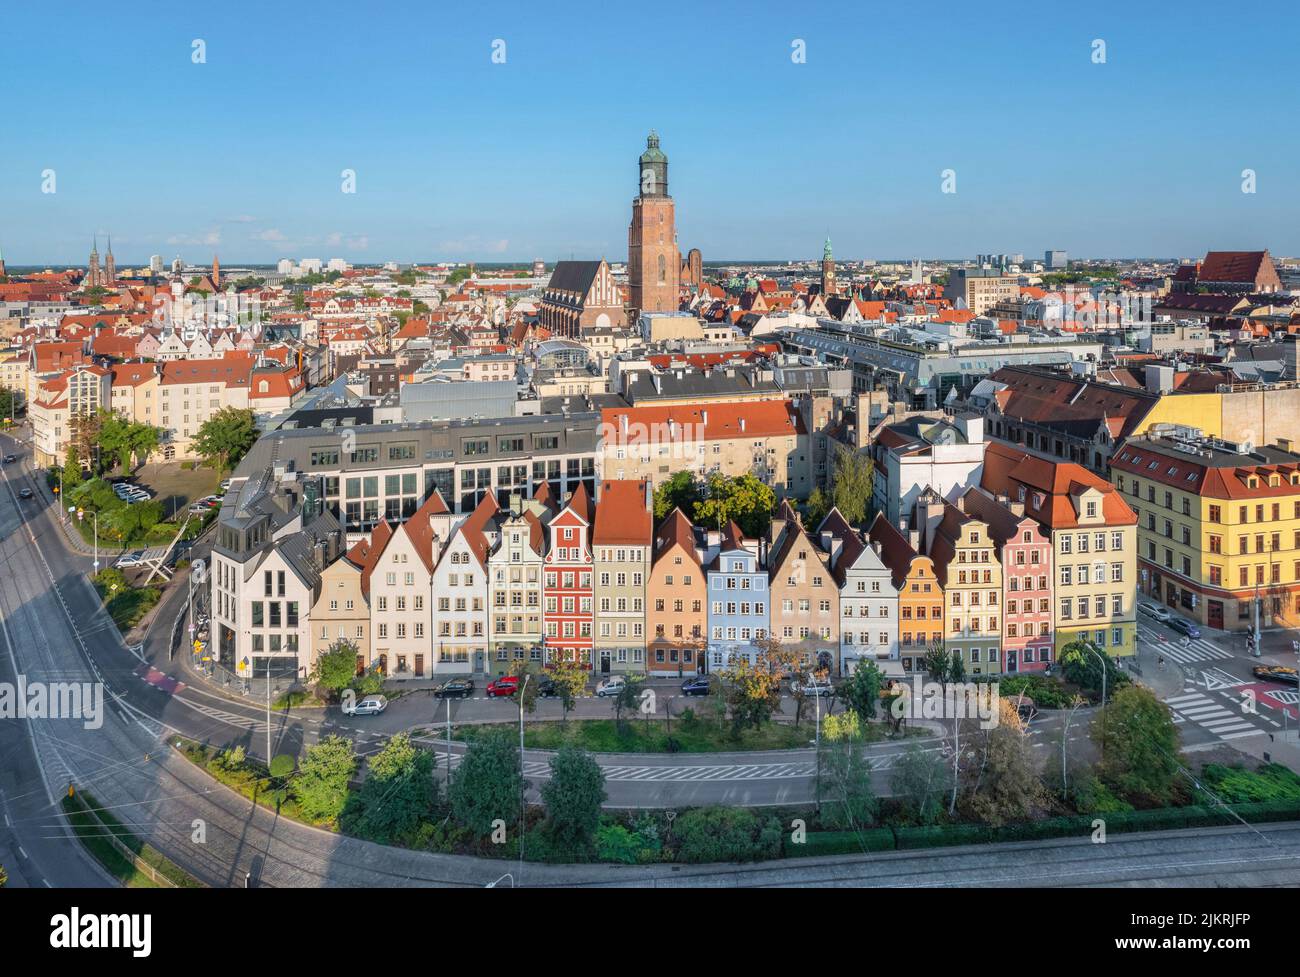 Wroclaw, Poland. Aerial view of quarter of well-preserved old houses in the historical center of the city Stock Photo